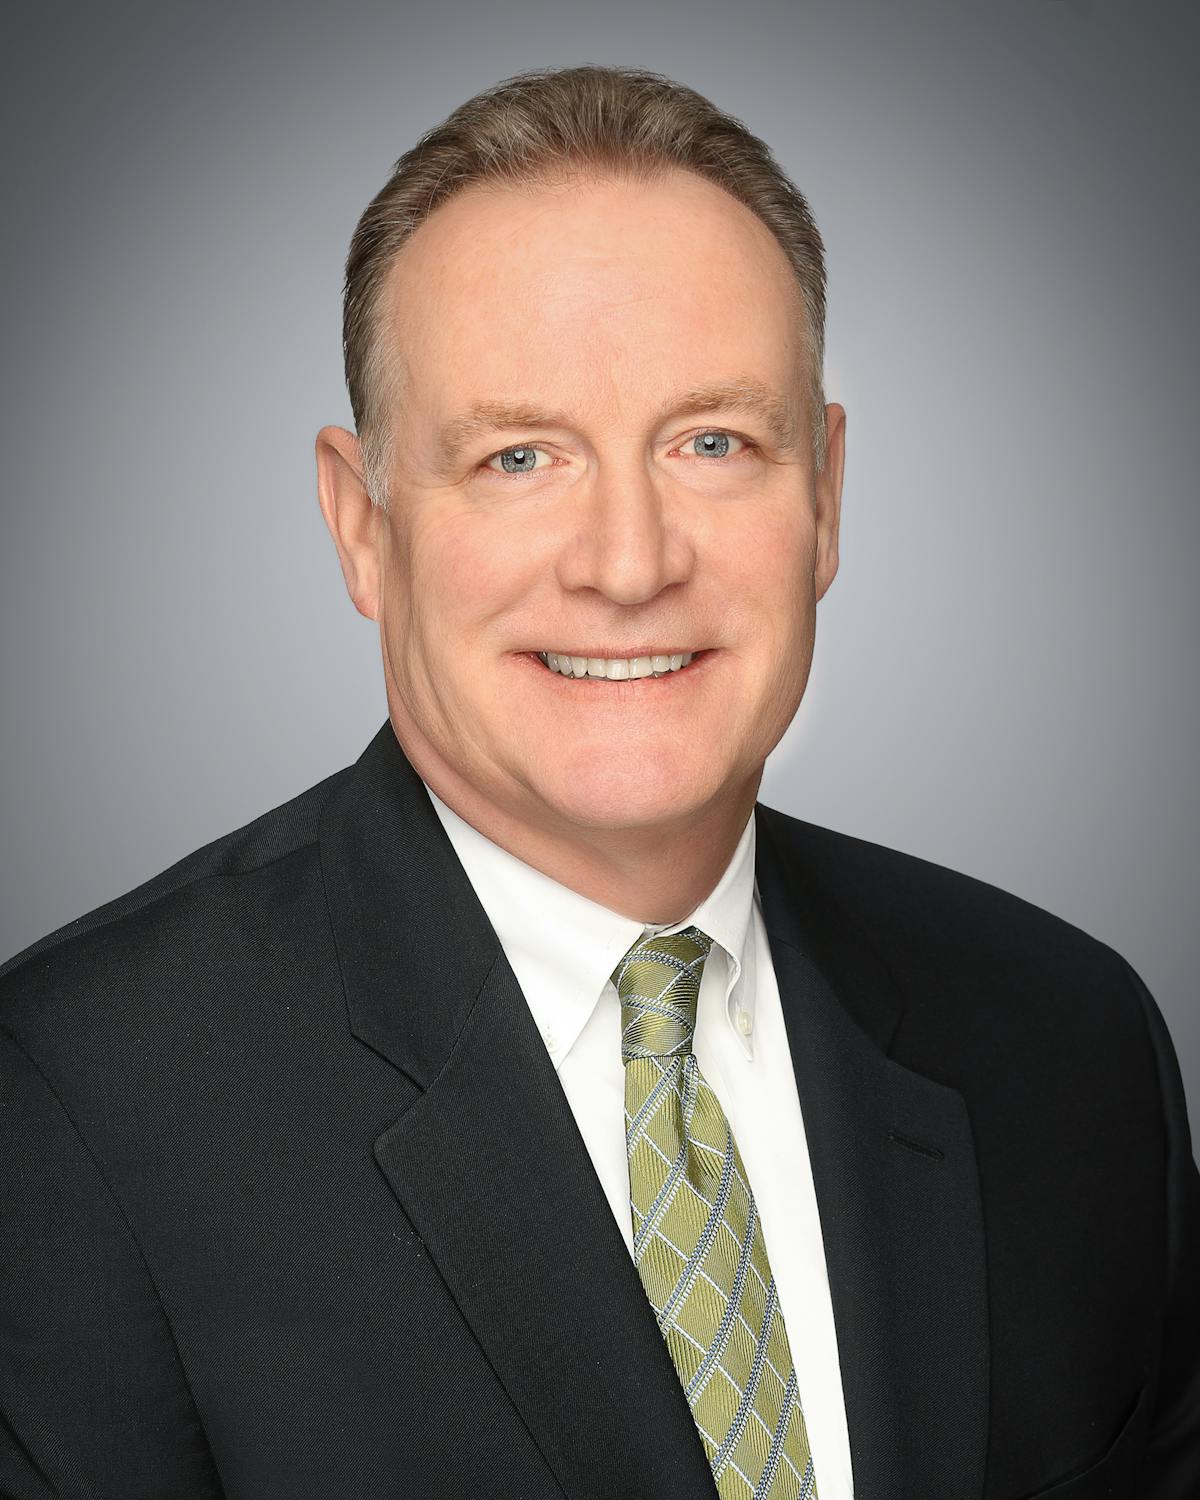 Michael Booth, AICP, has joined HNTB Corp. as transit planning group director and associate vice president.